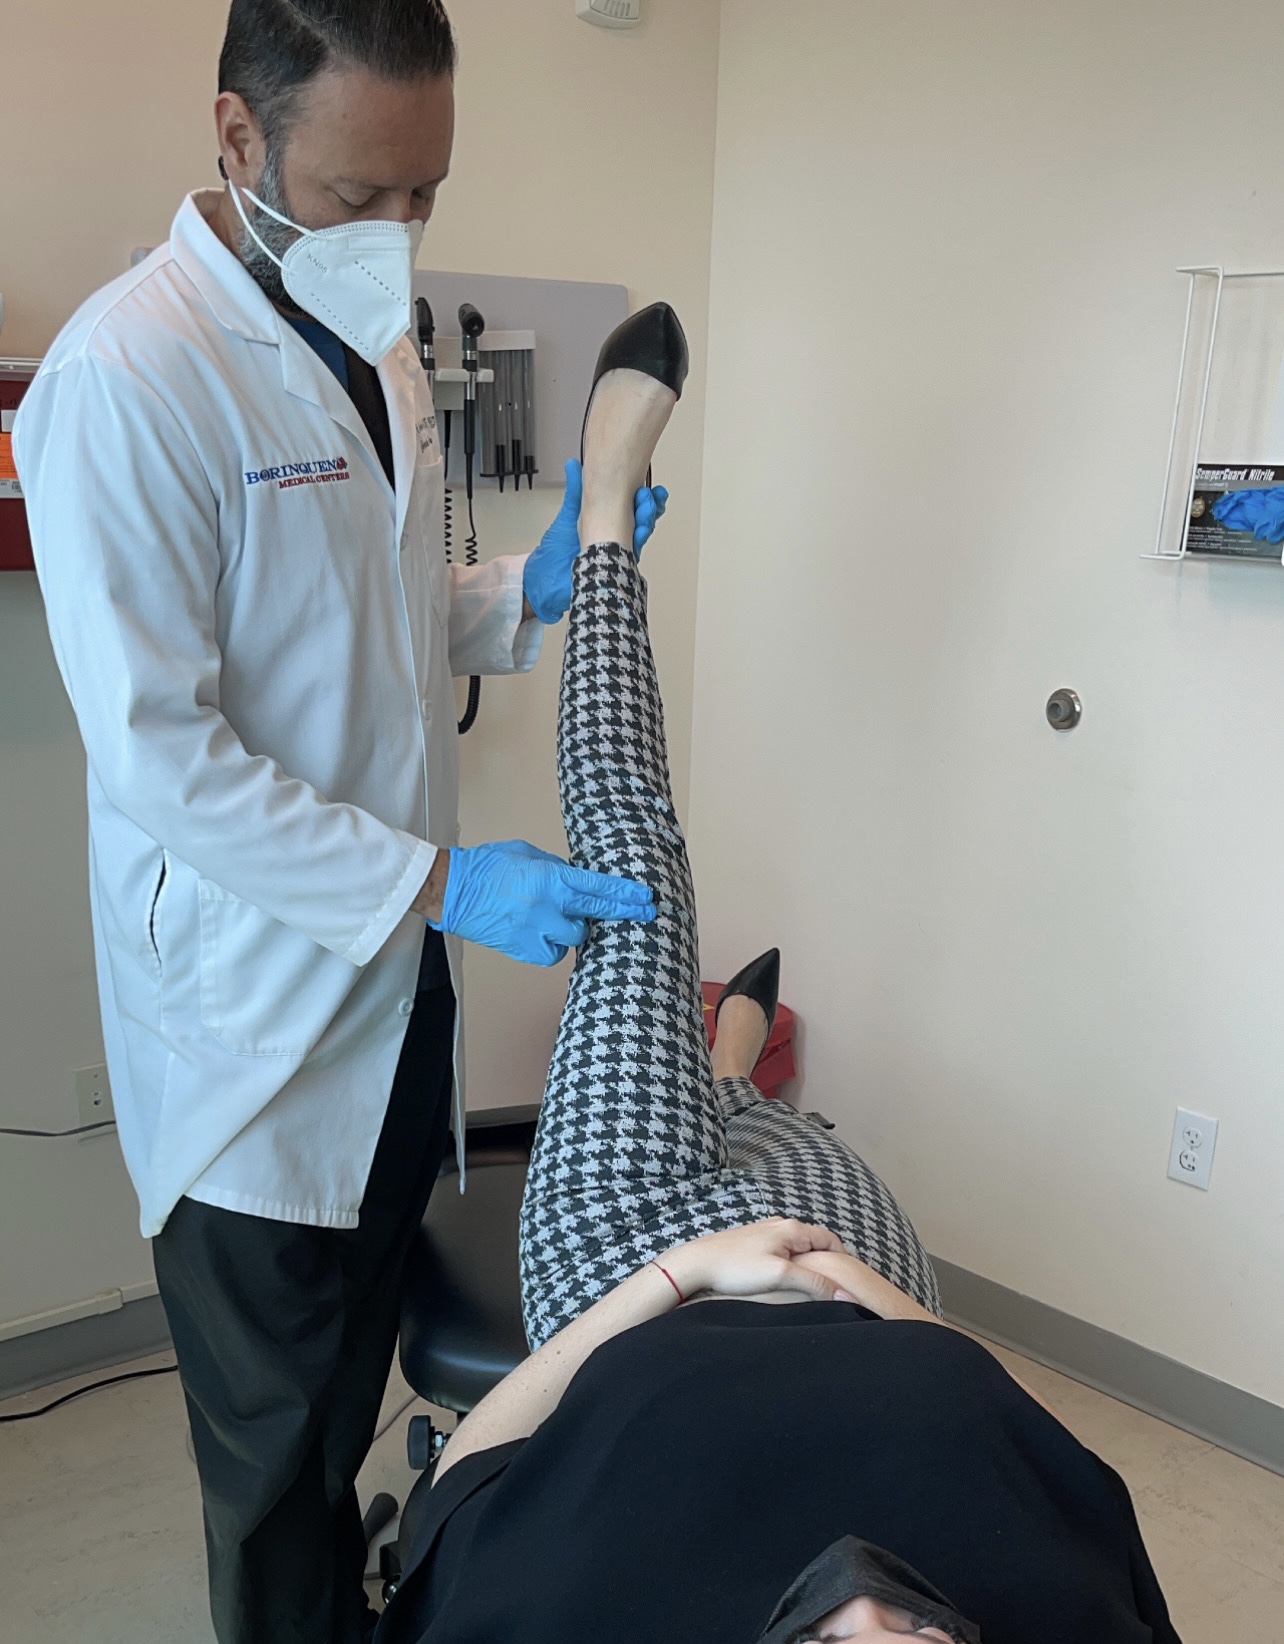 Male chiropractor adjusting the leg of a woman in a medical office.